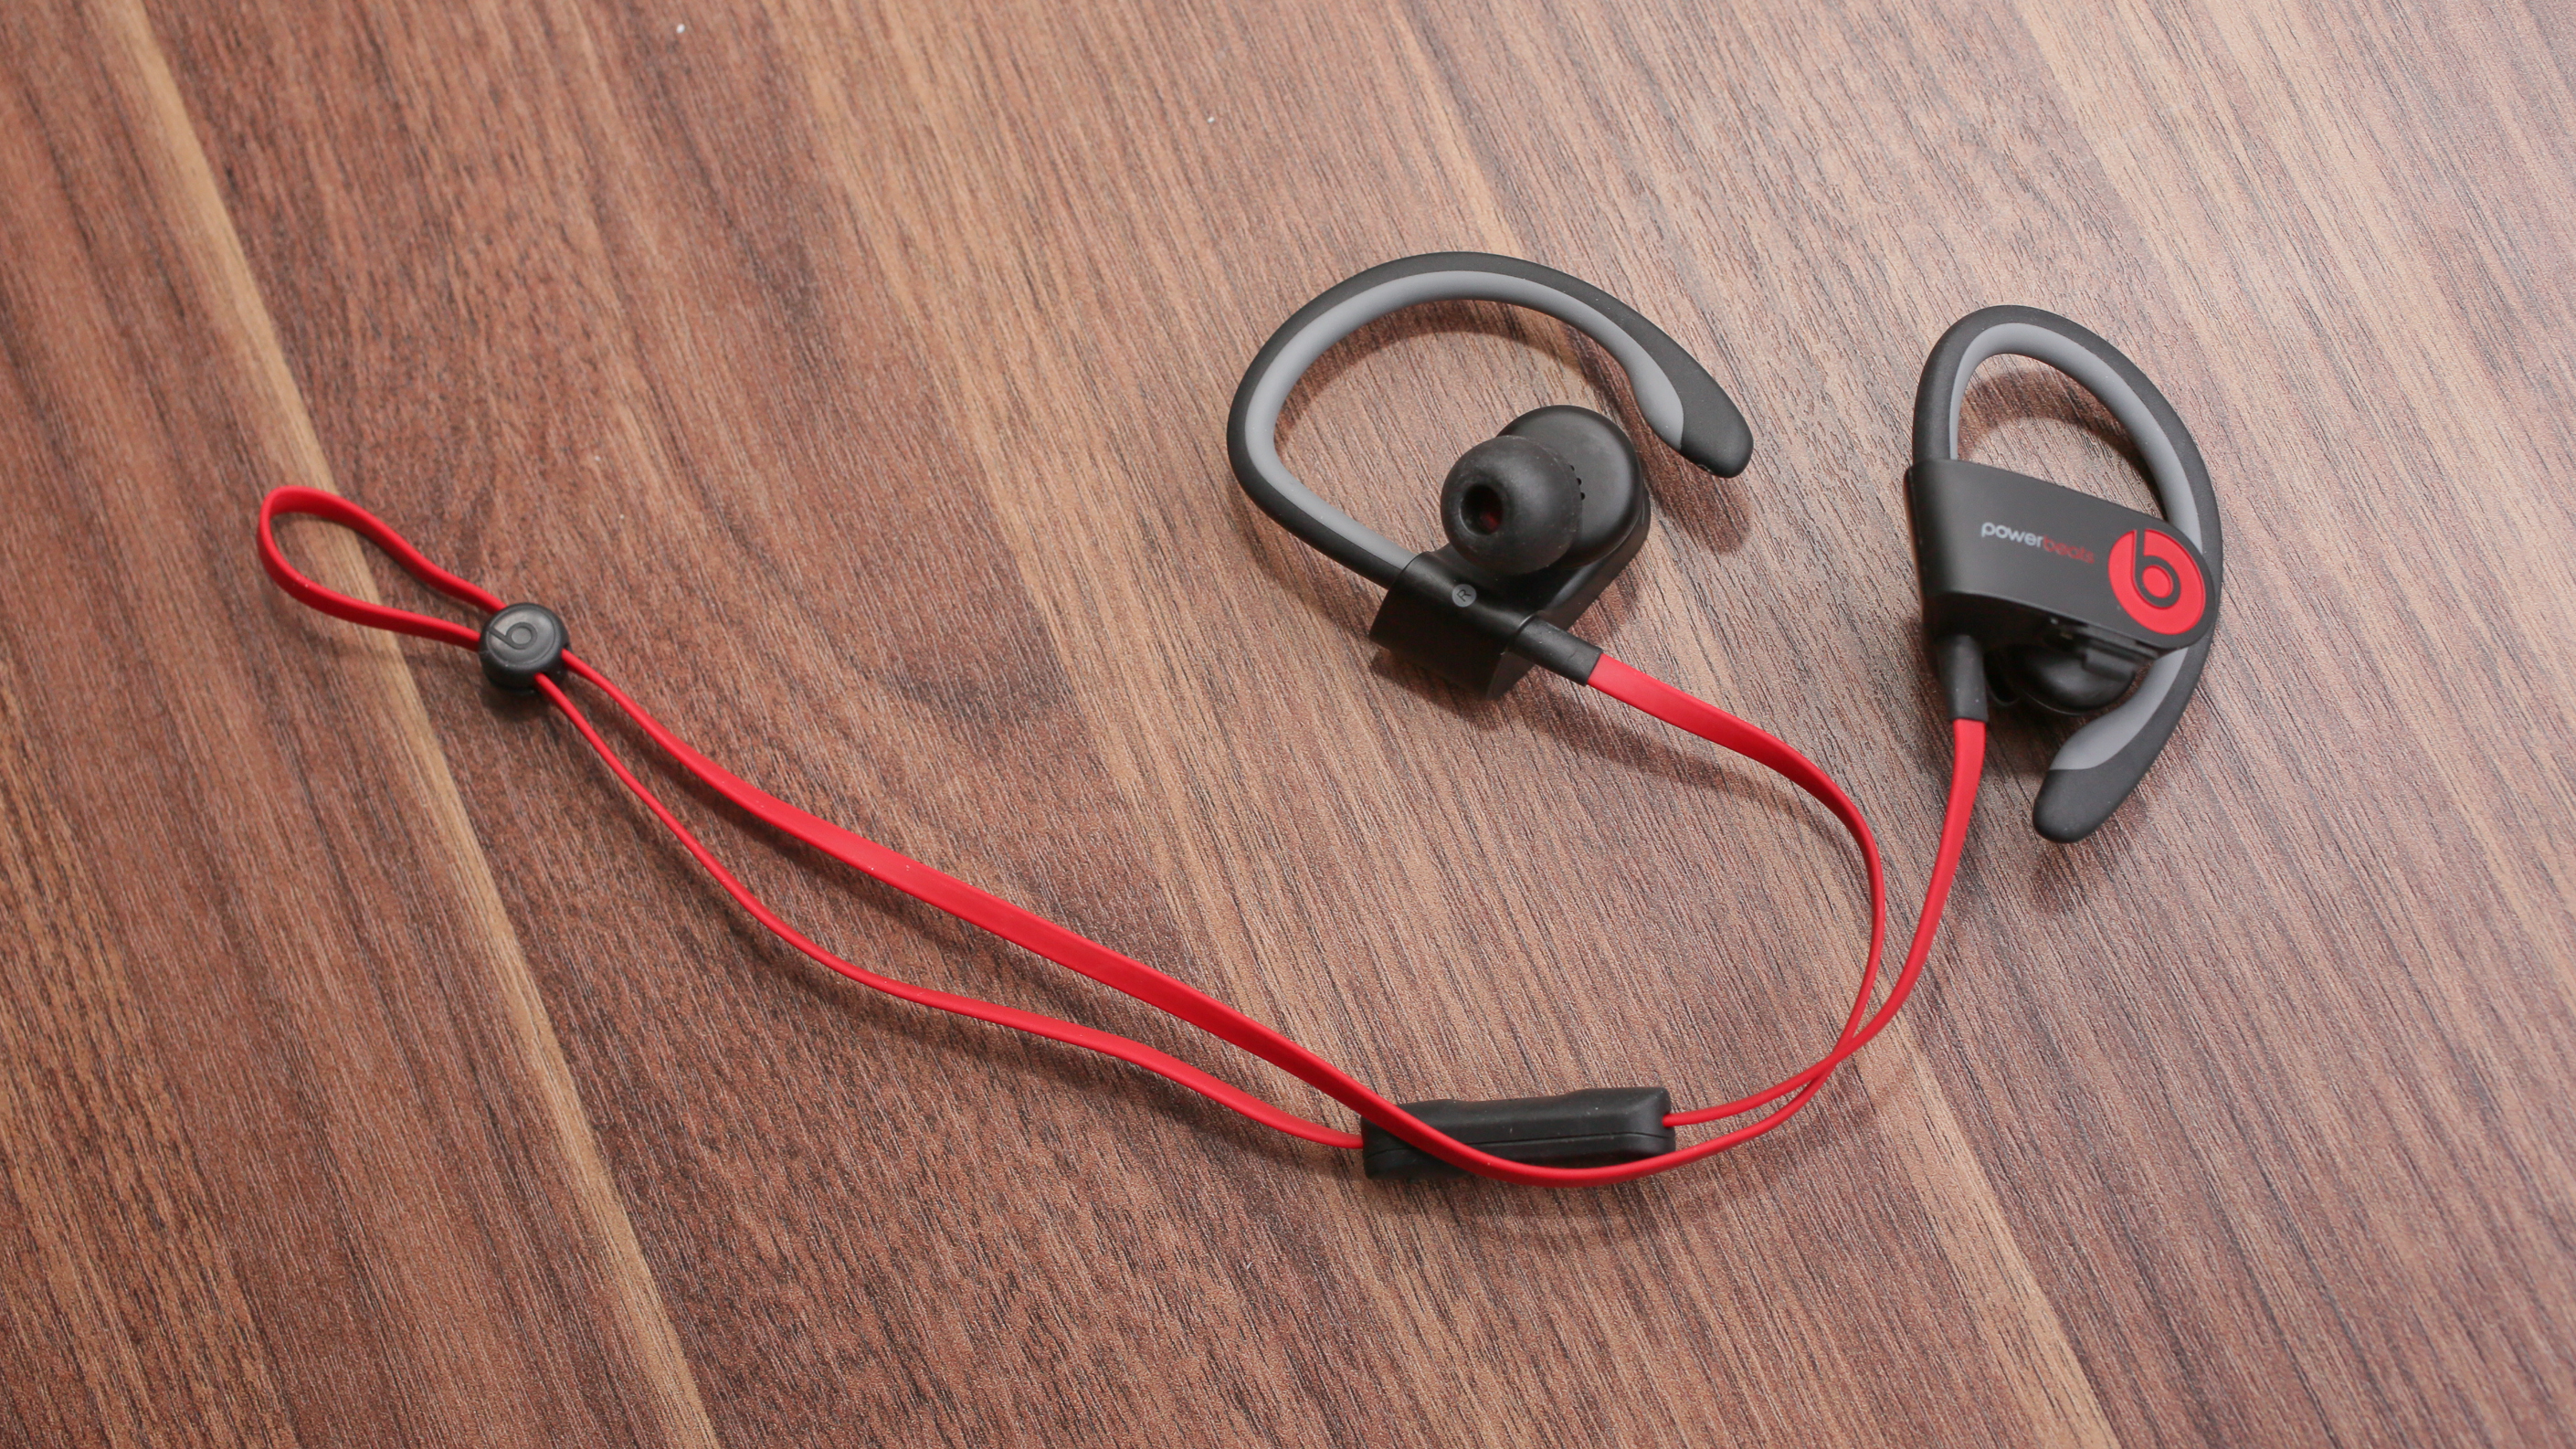 powerbeats 2 quick charge